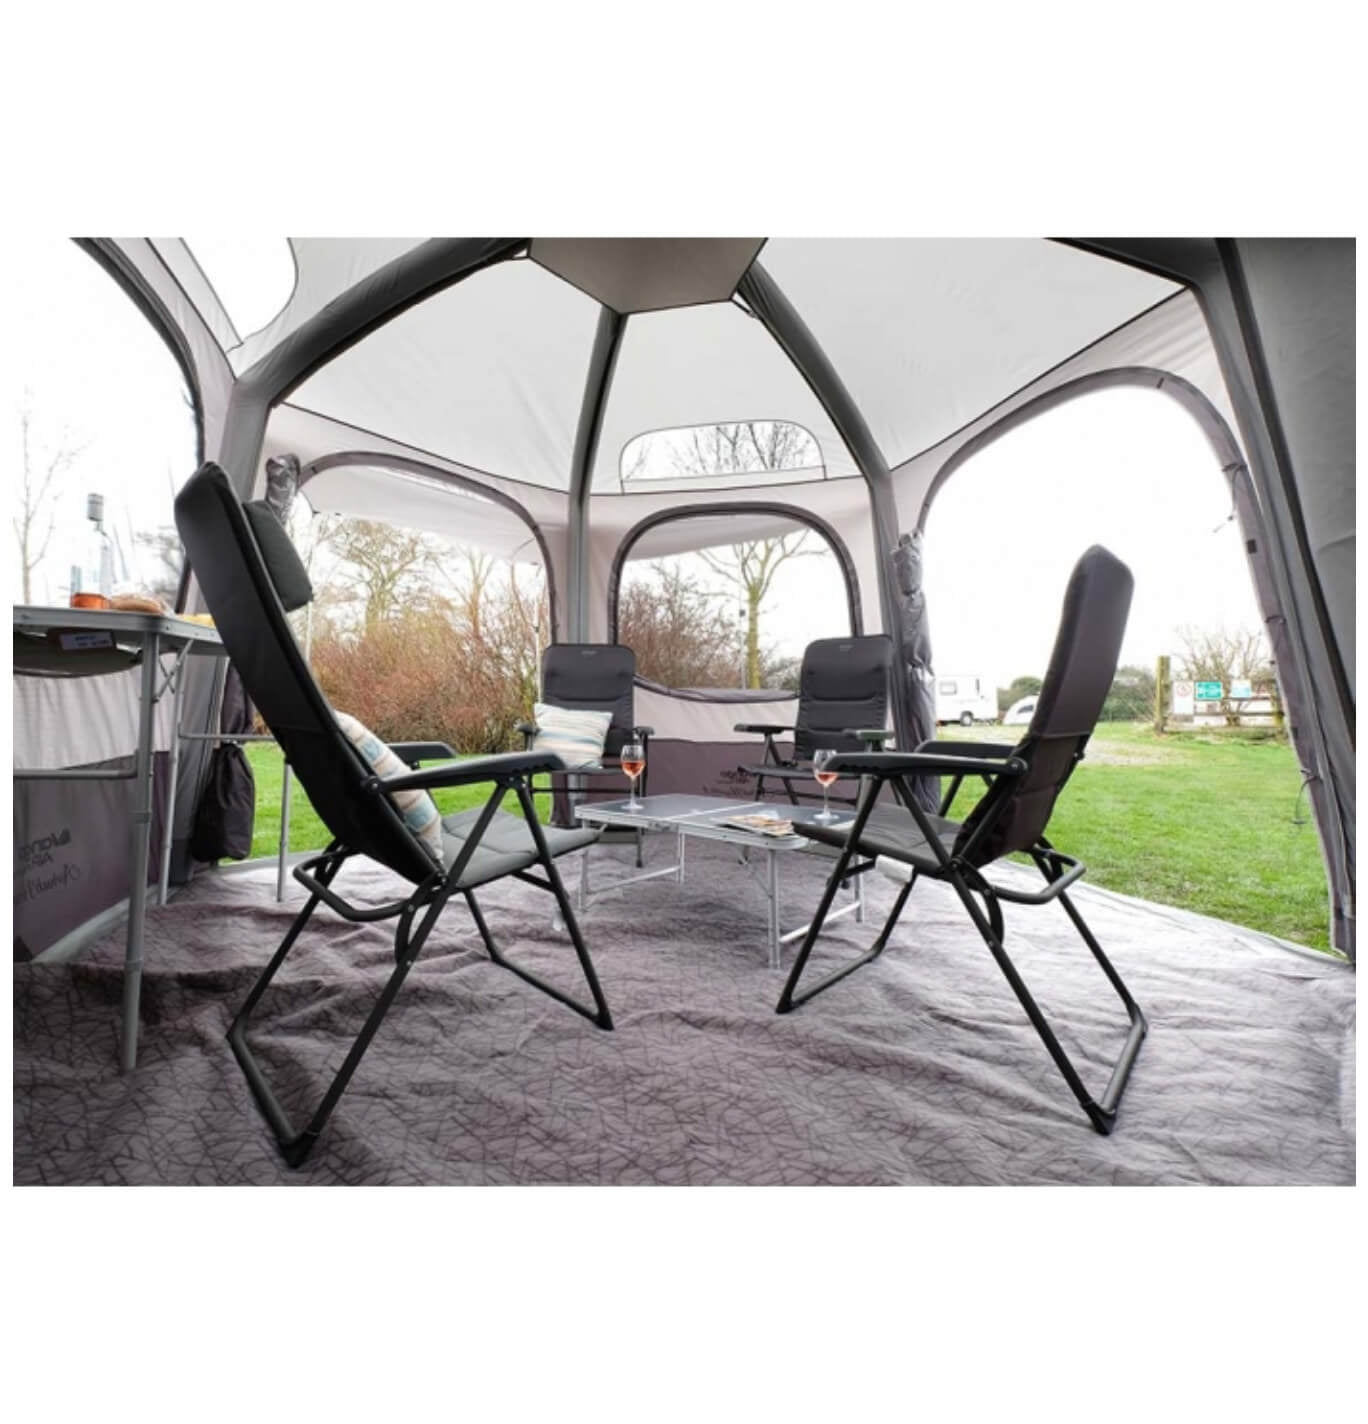 the vango hexway low set up with tables and chairs